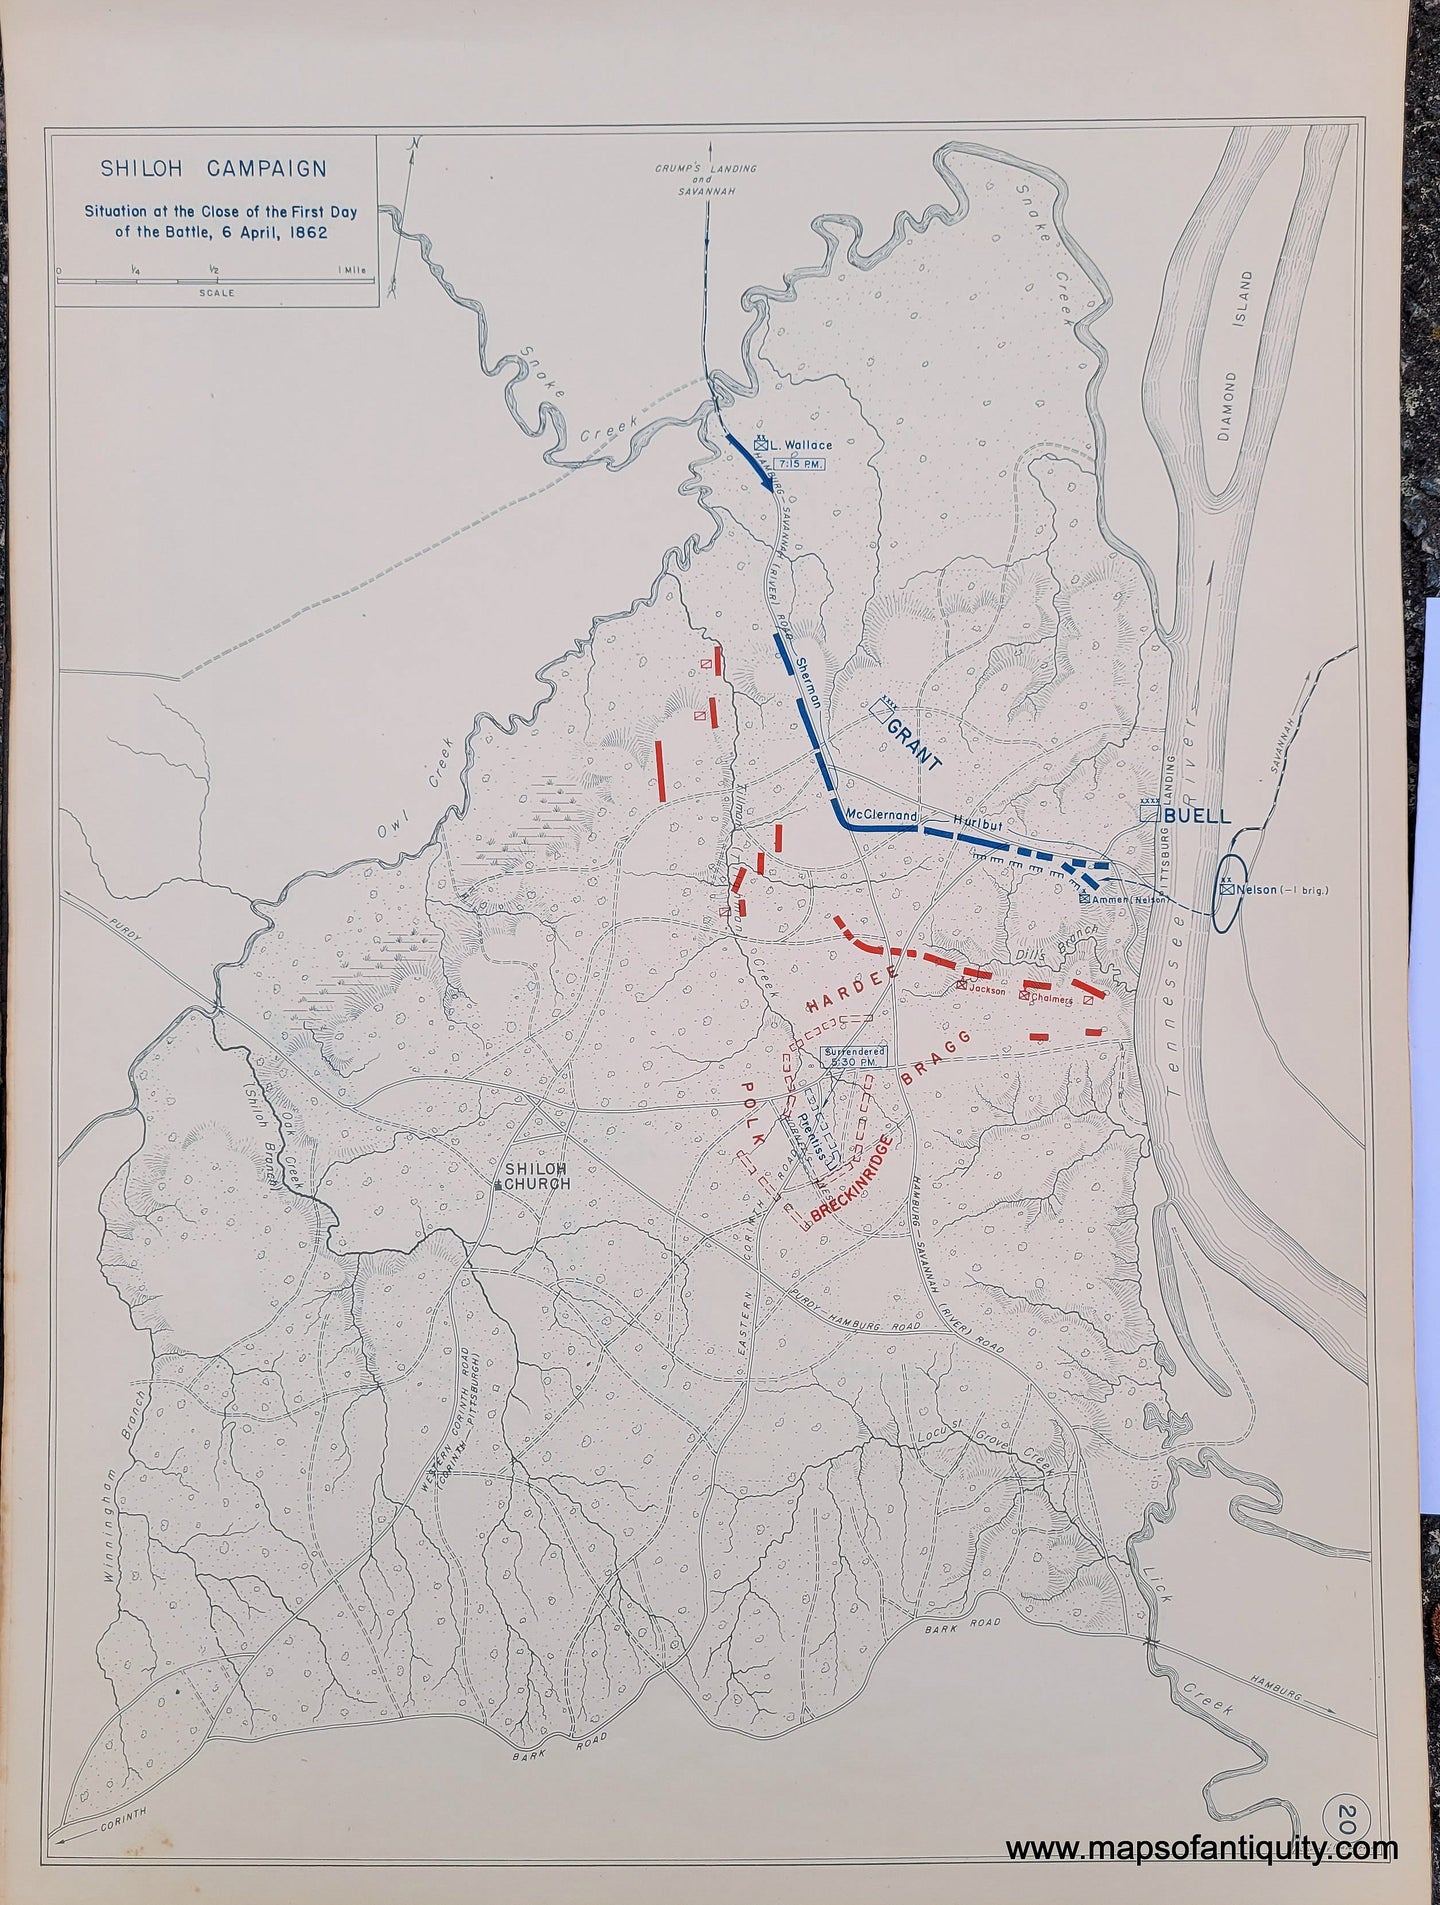 Genuine-Antique-Map-Shiloh-Campaign-Situation-at-the-Close-of-the-First-Day-of-the-Battle-6-April-1862-1948-Matthew-Forney-Steele-Dept-of-Military-Art-and-Engineering-US-Military-Academy-West-Point-Maps-Of-Antiquity